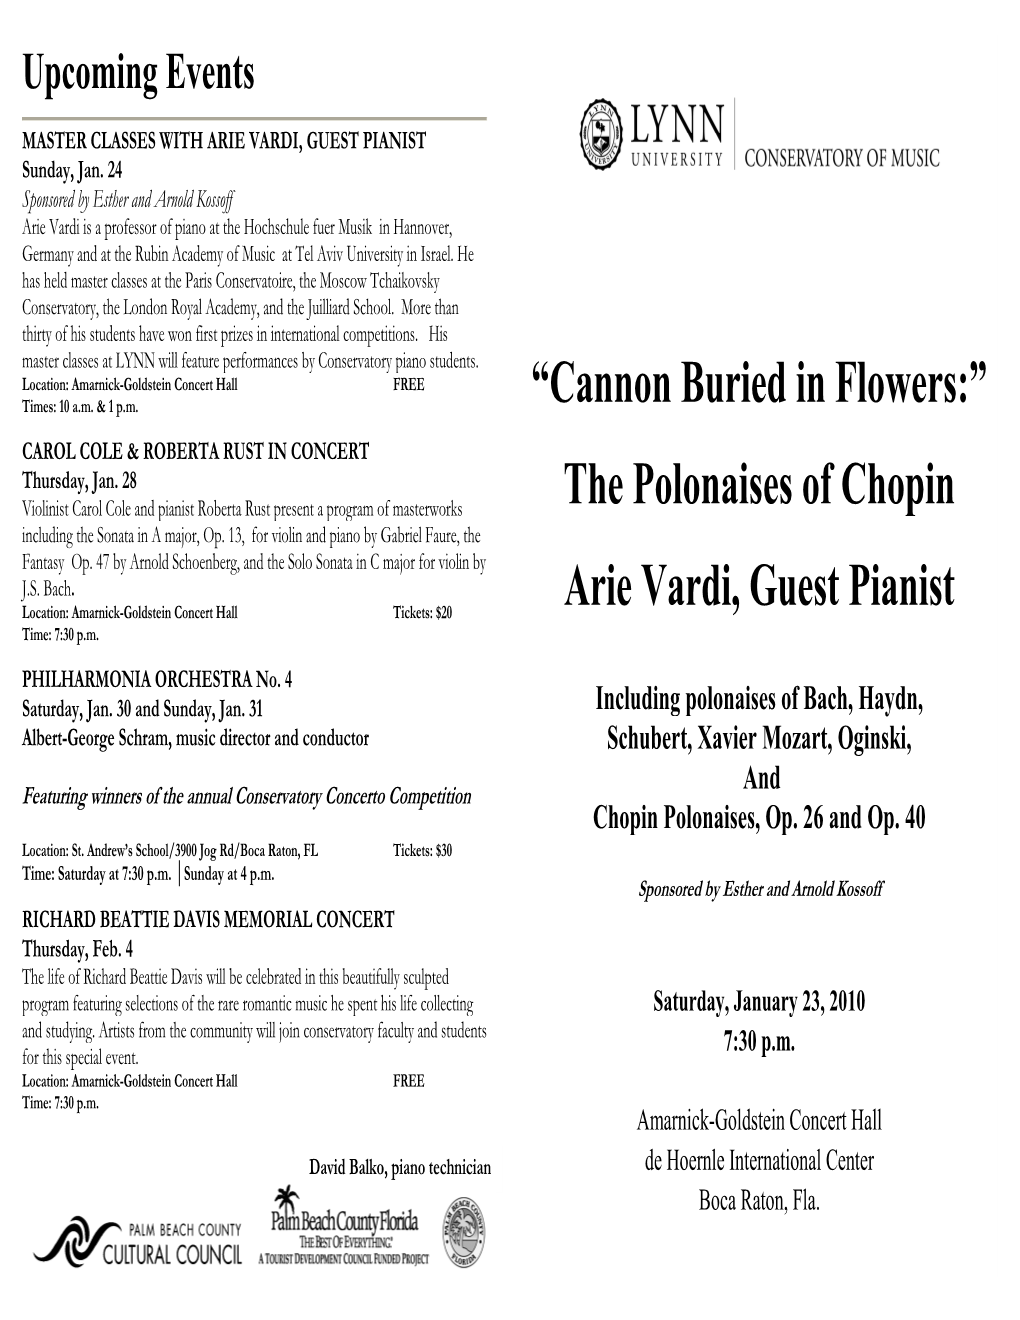 2009-2010 Guest Pianist Weekend:" Cannon Buried in Flowers" The